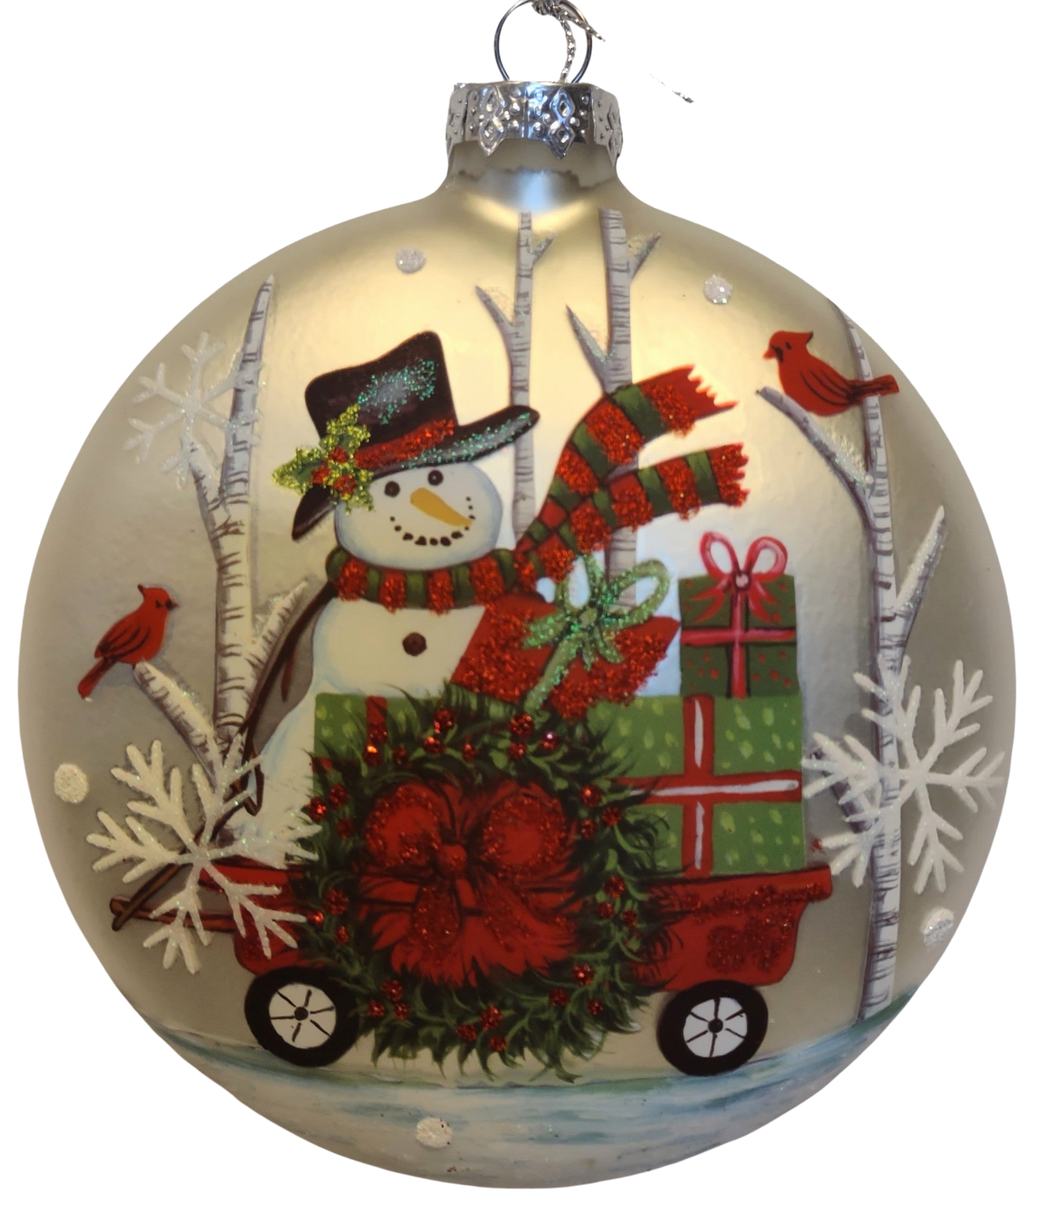 Glass Hand Painted Snowman Ornament with Winter Scene/Red Truck/Presents